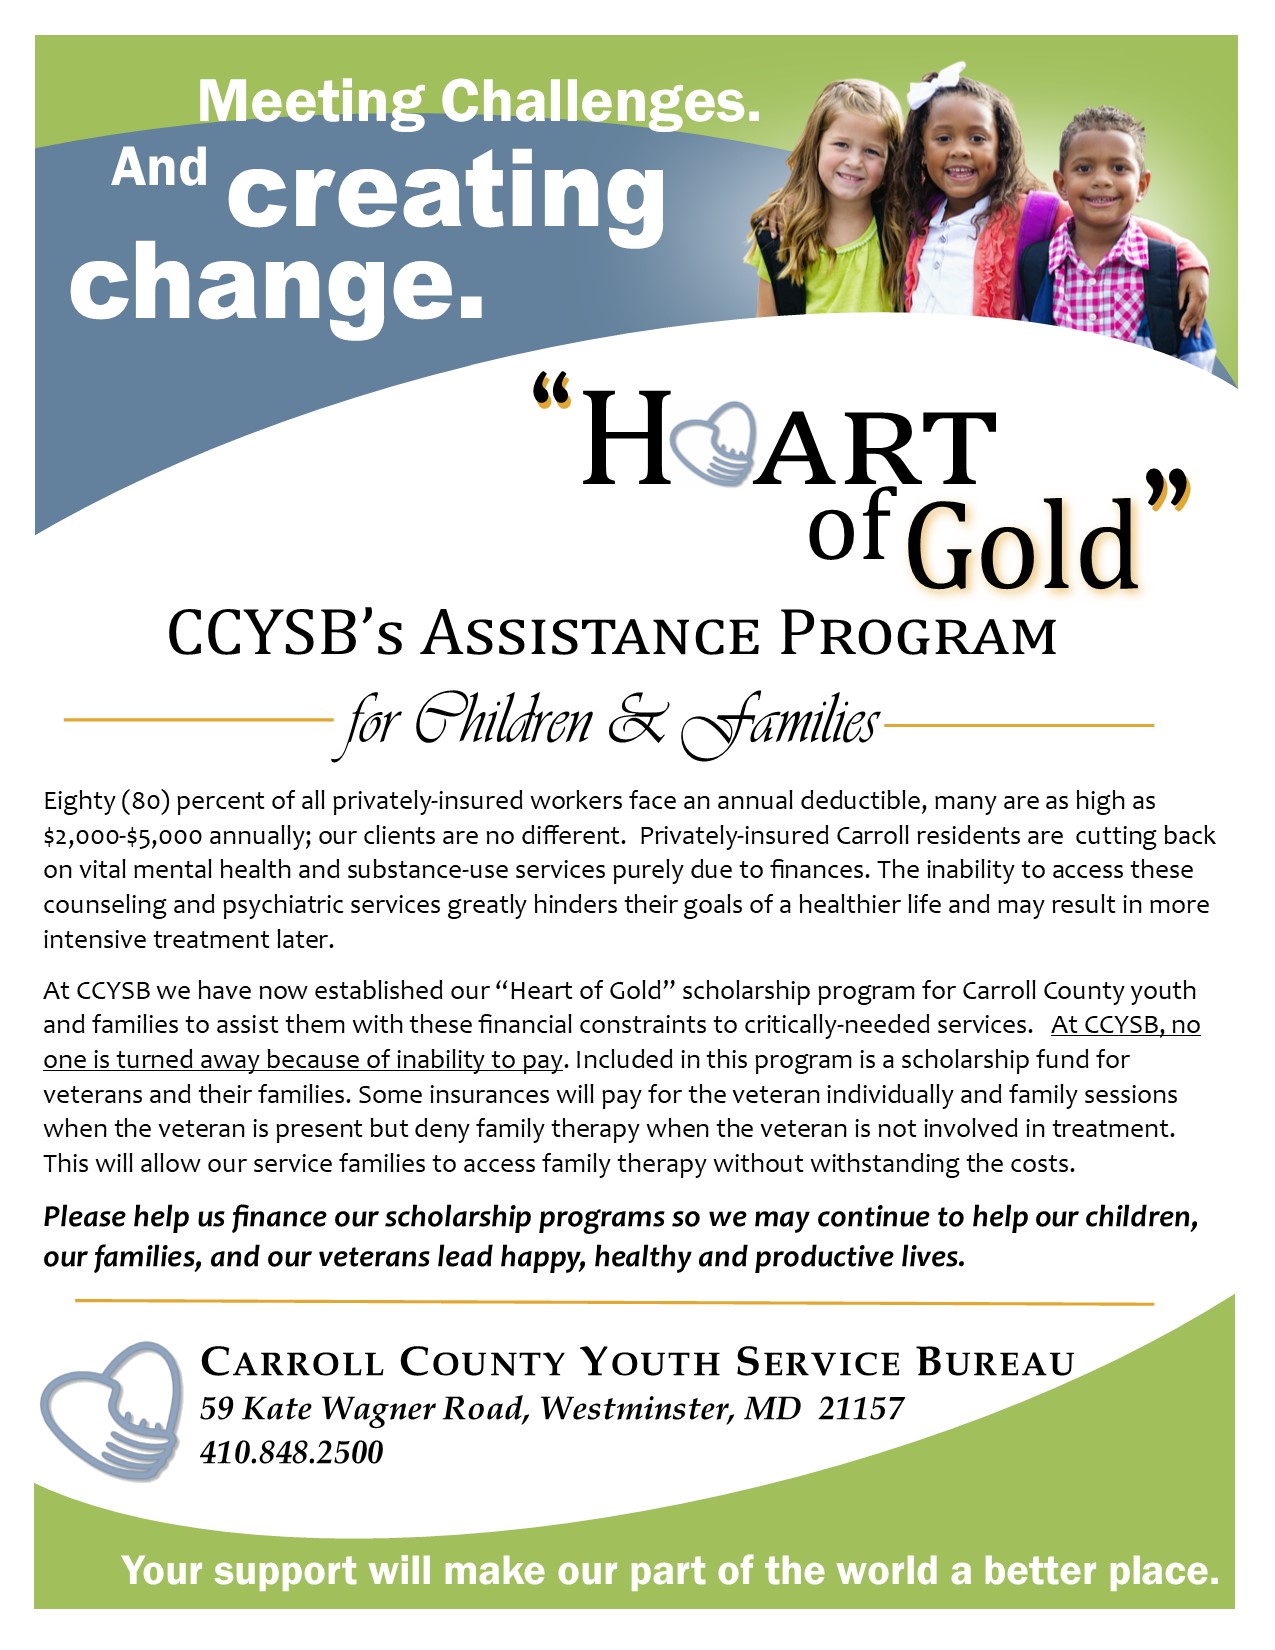 CCYSB-Heart-of-Gold-Giving-Flyer-page-1-only